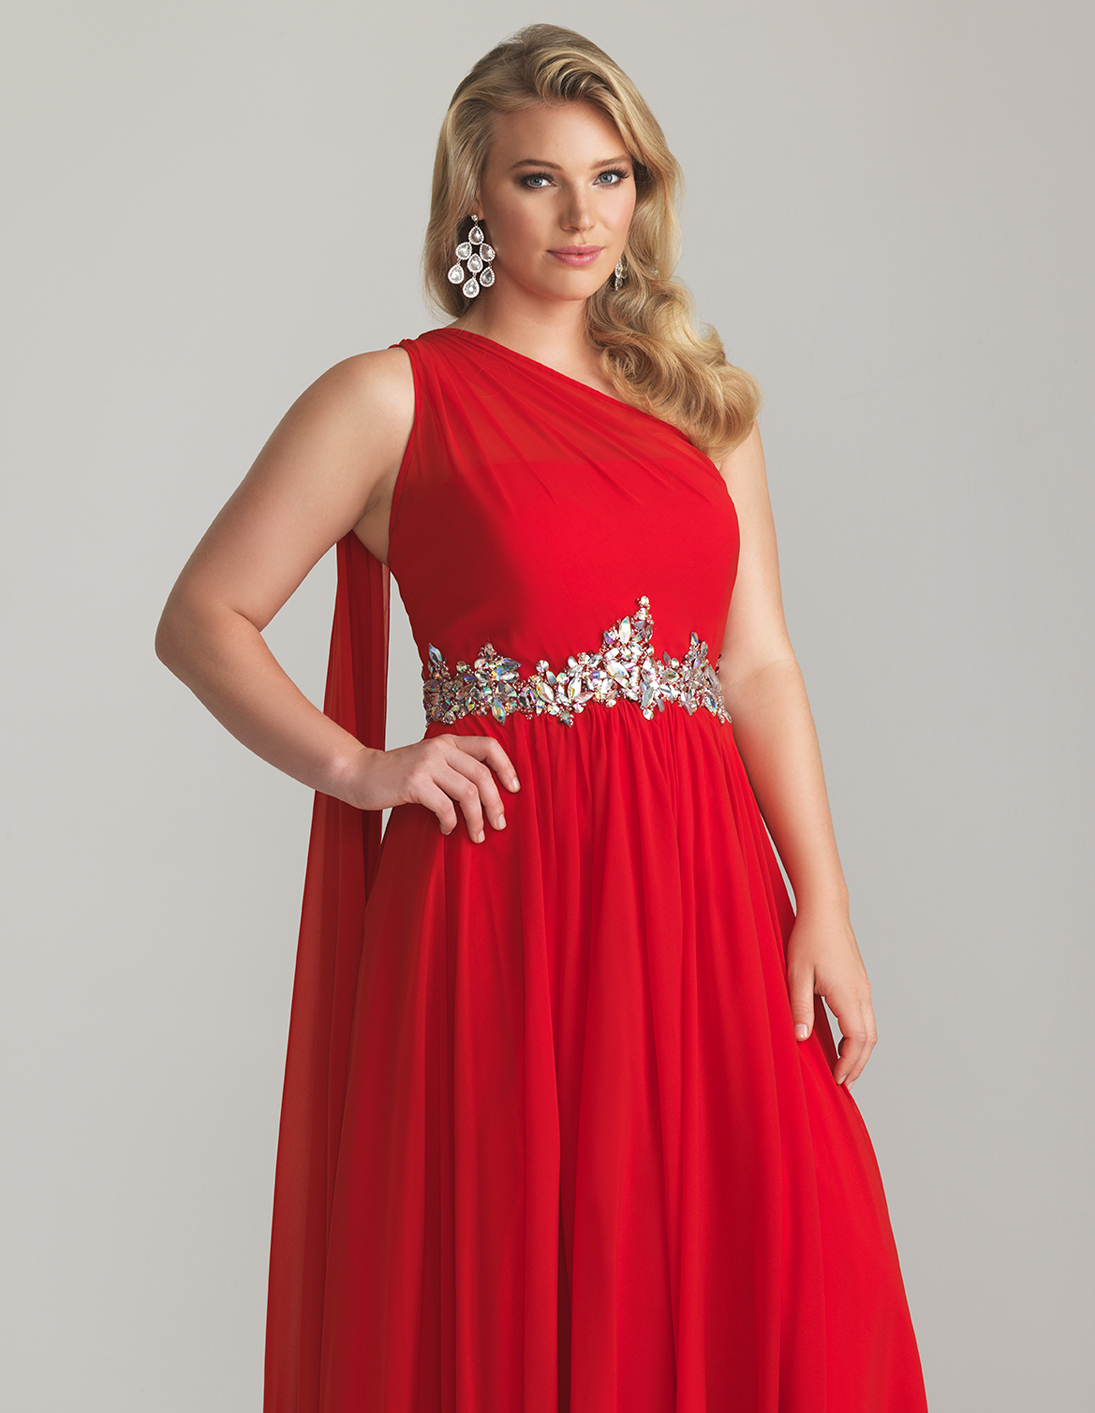 Cheap Plus Size Prom Dresses- Consider The Following Factors